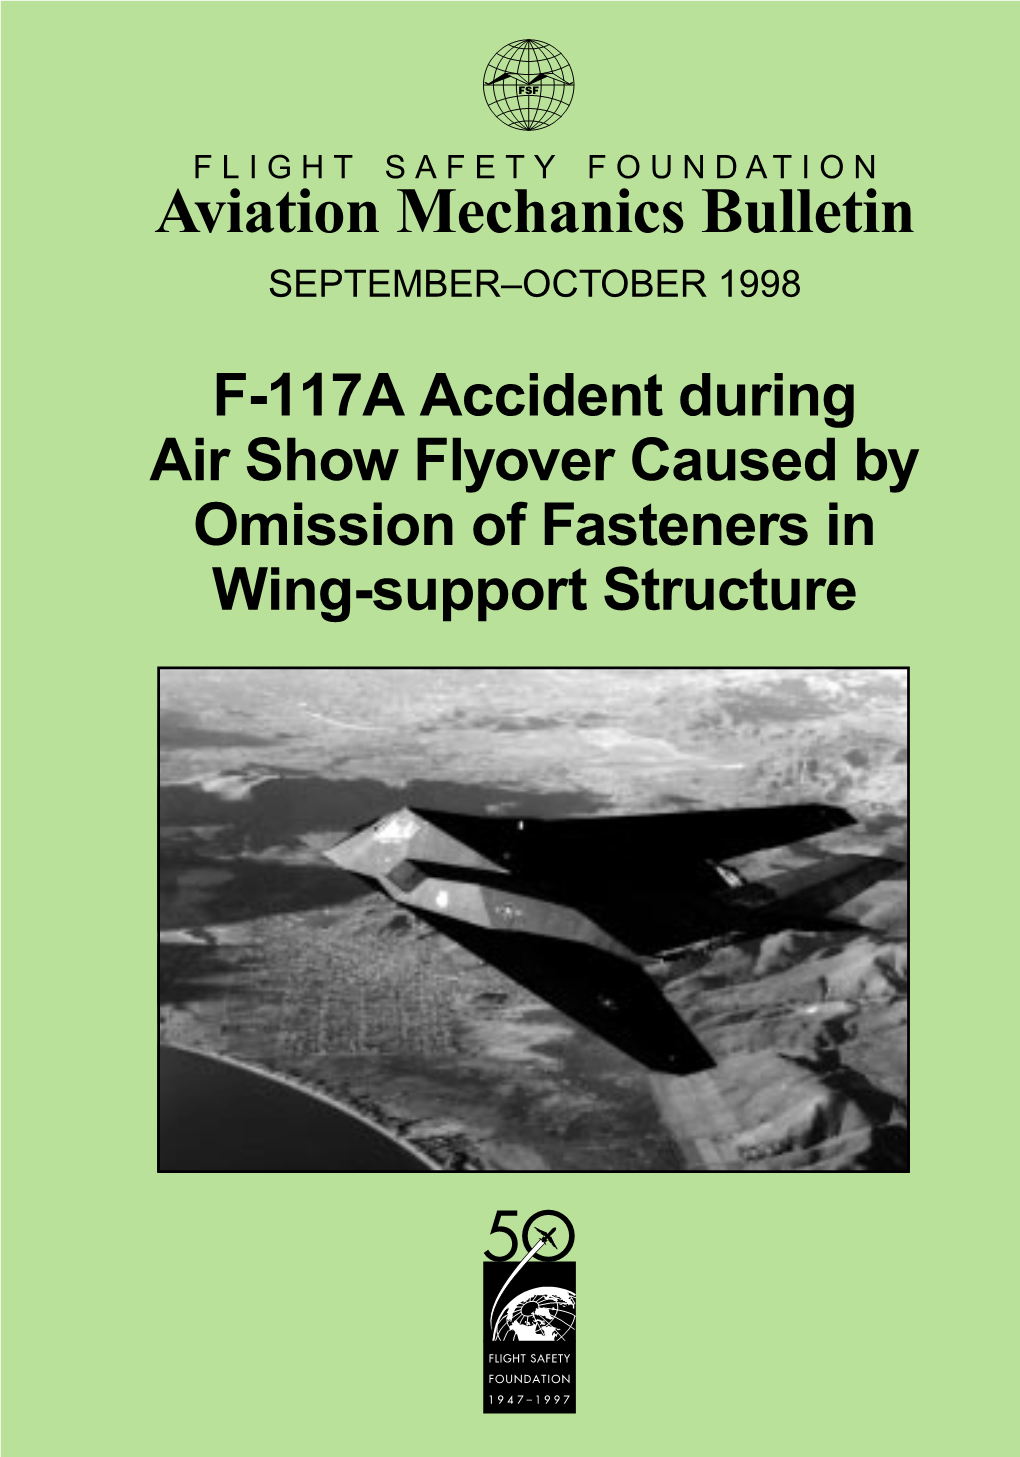 F-117A Accident During Air Show Flyover Caused by Omission of Fasteners in Wing-Support Structure